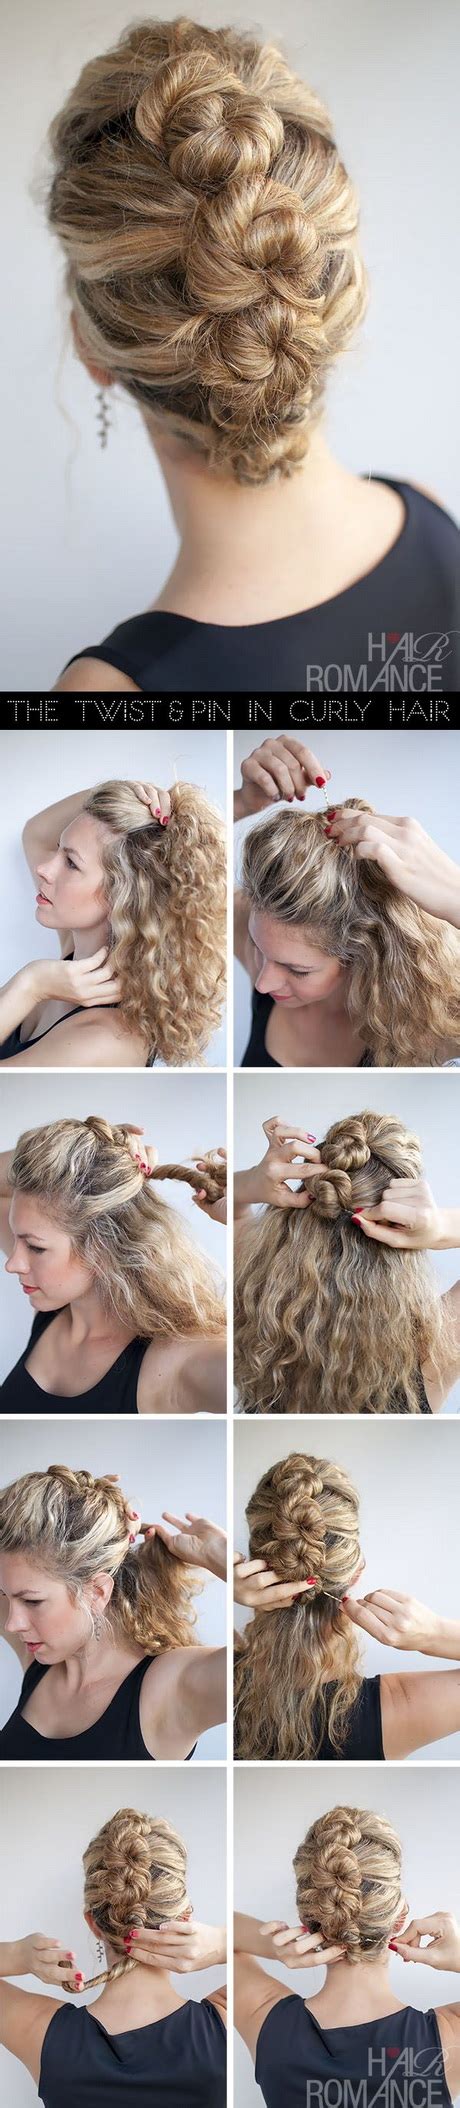 There are short hairstyles for wedding guests, as well as wedding guest hairstyles for long hair—and everything in between. Do it yourself prom hairstyles